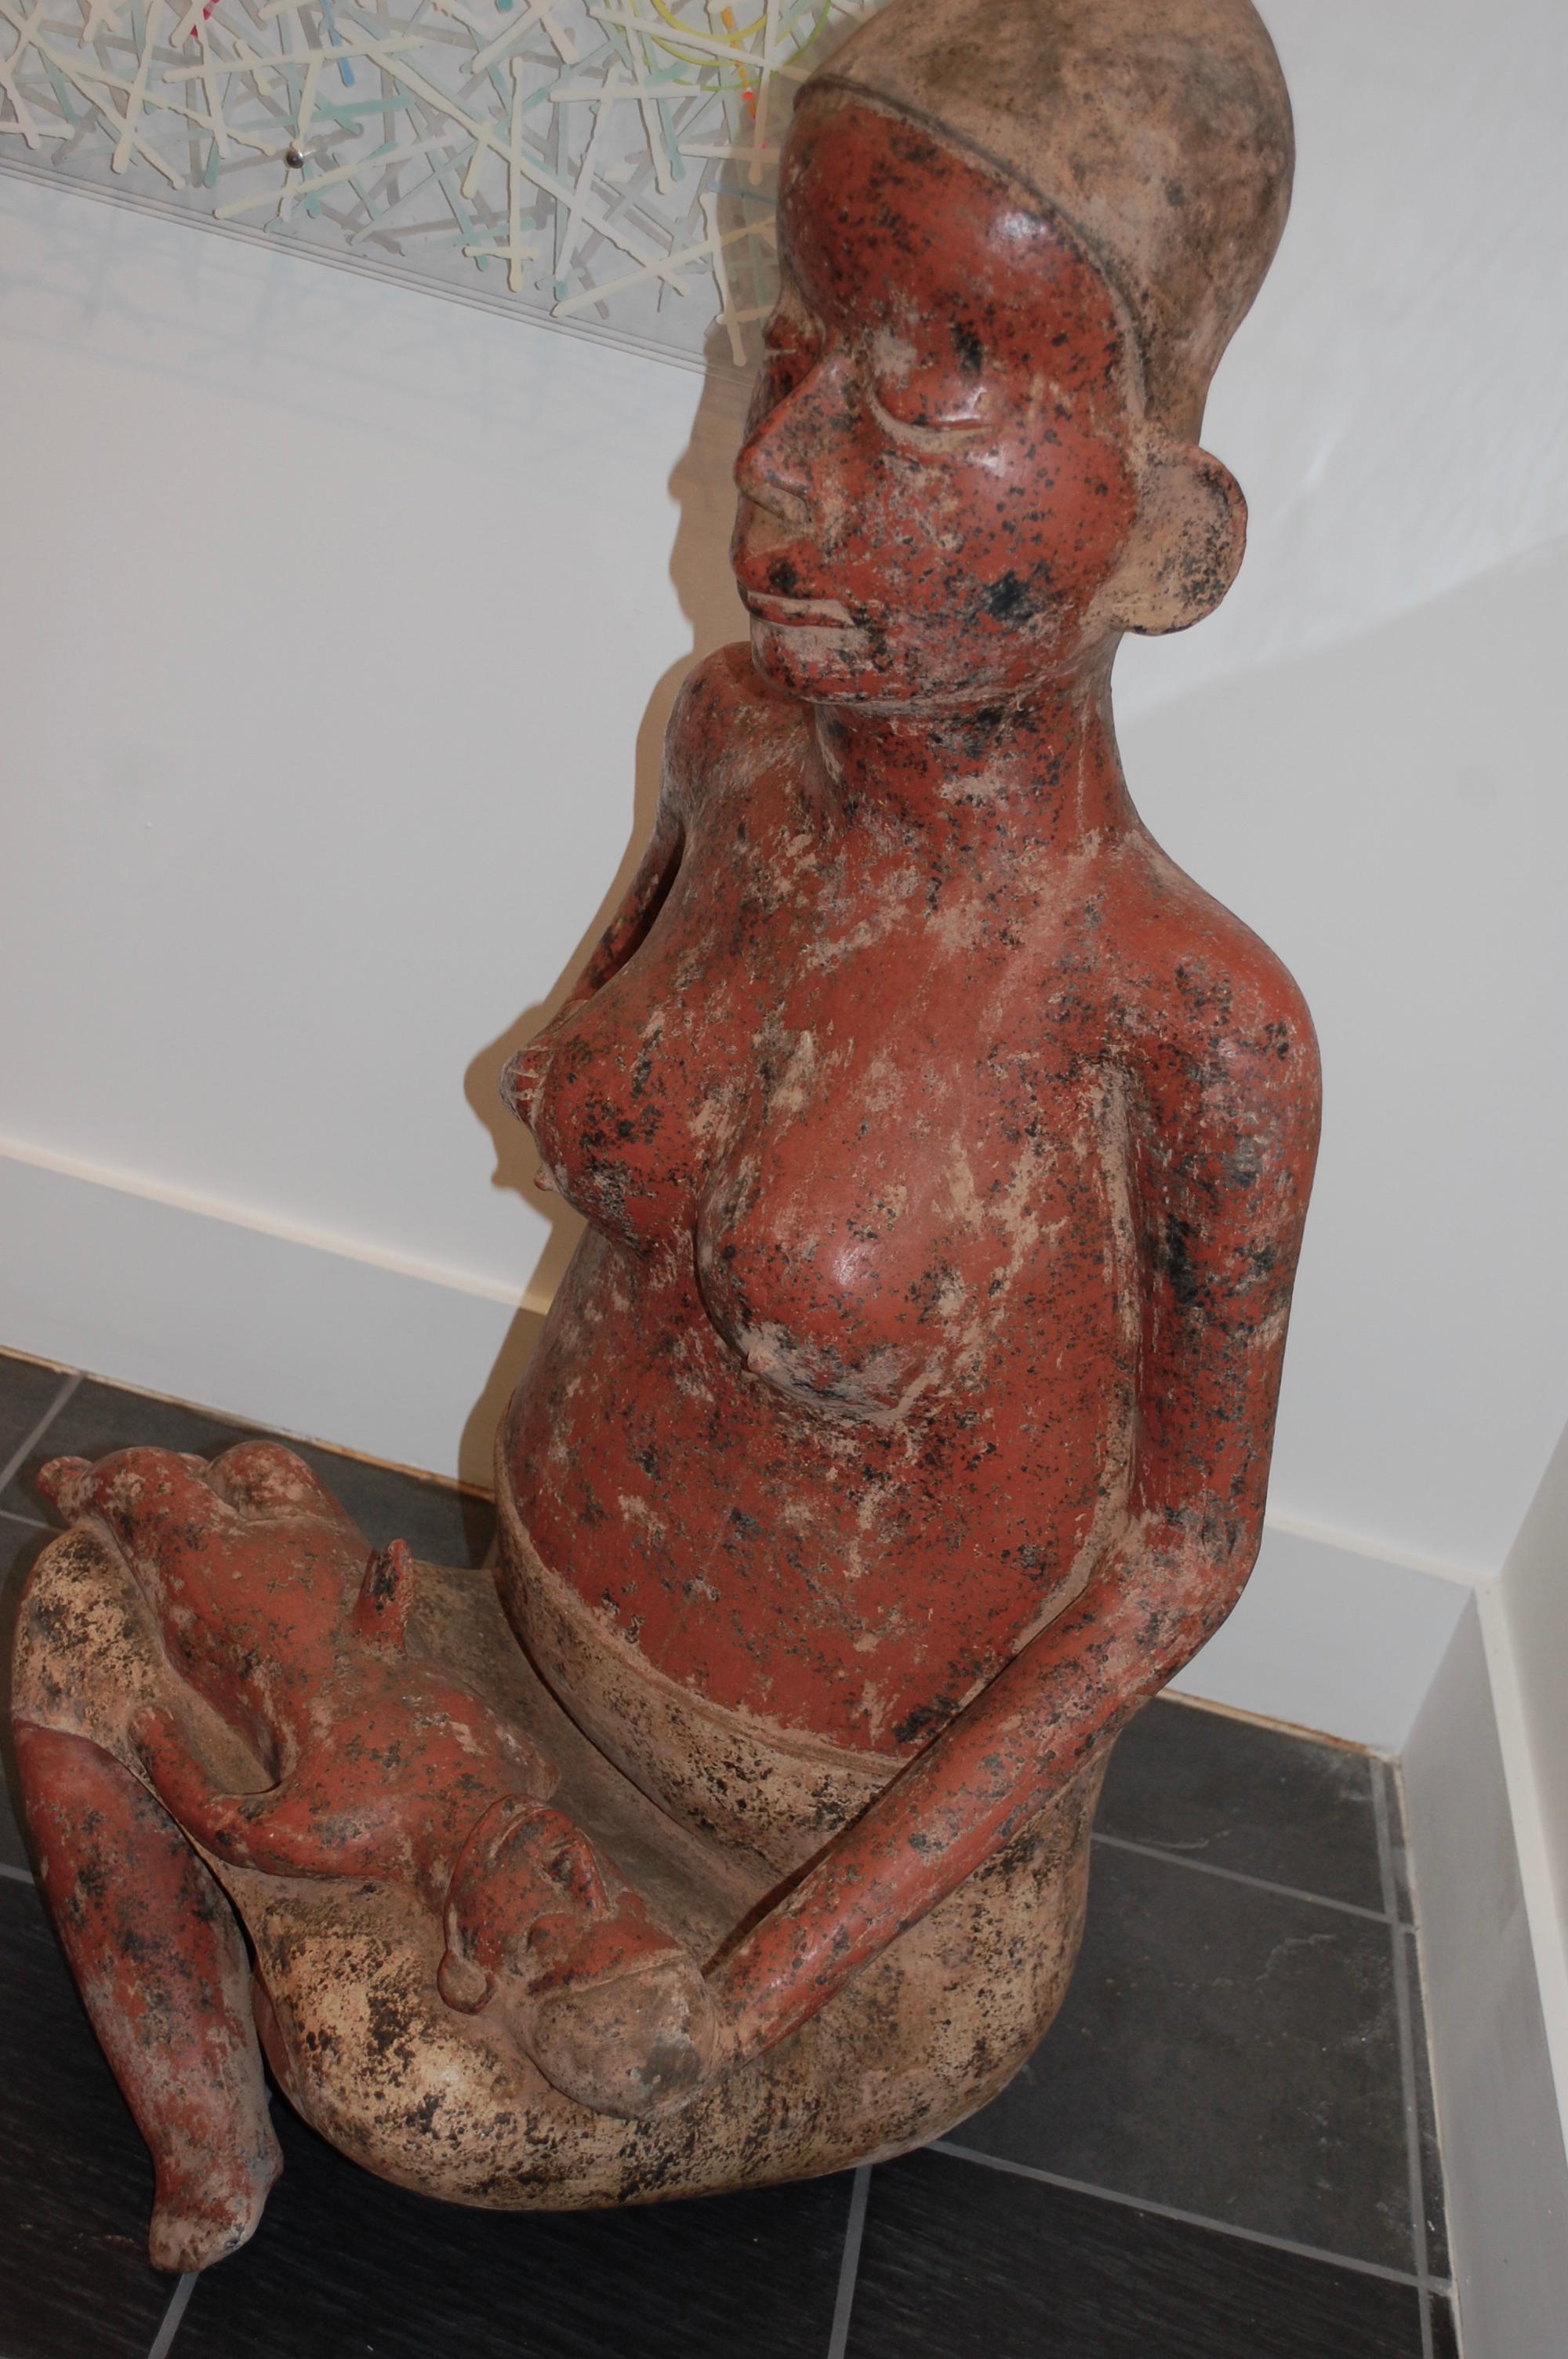  Seated Mother And Child, 
Modern Pre Columbian style large sculpture edition 1/30, artist signed. 
Walter Bastianetto is an Italian born sculptor who moved to Mexico in the 1970s and resided there. Well-known artist for his original clay,